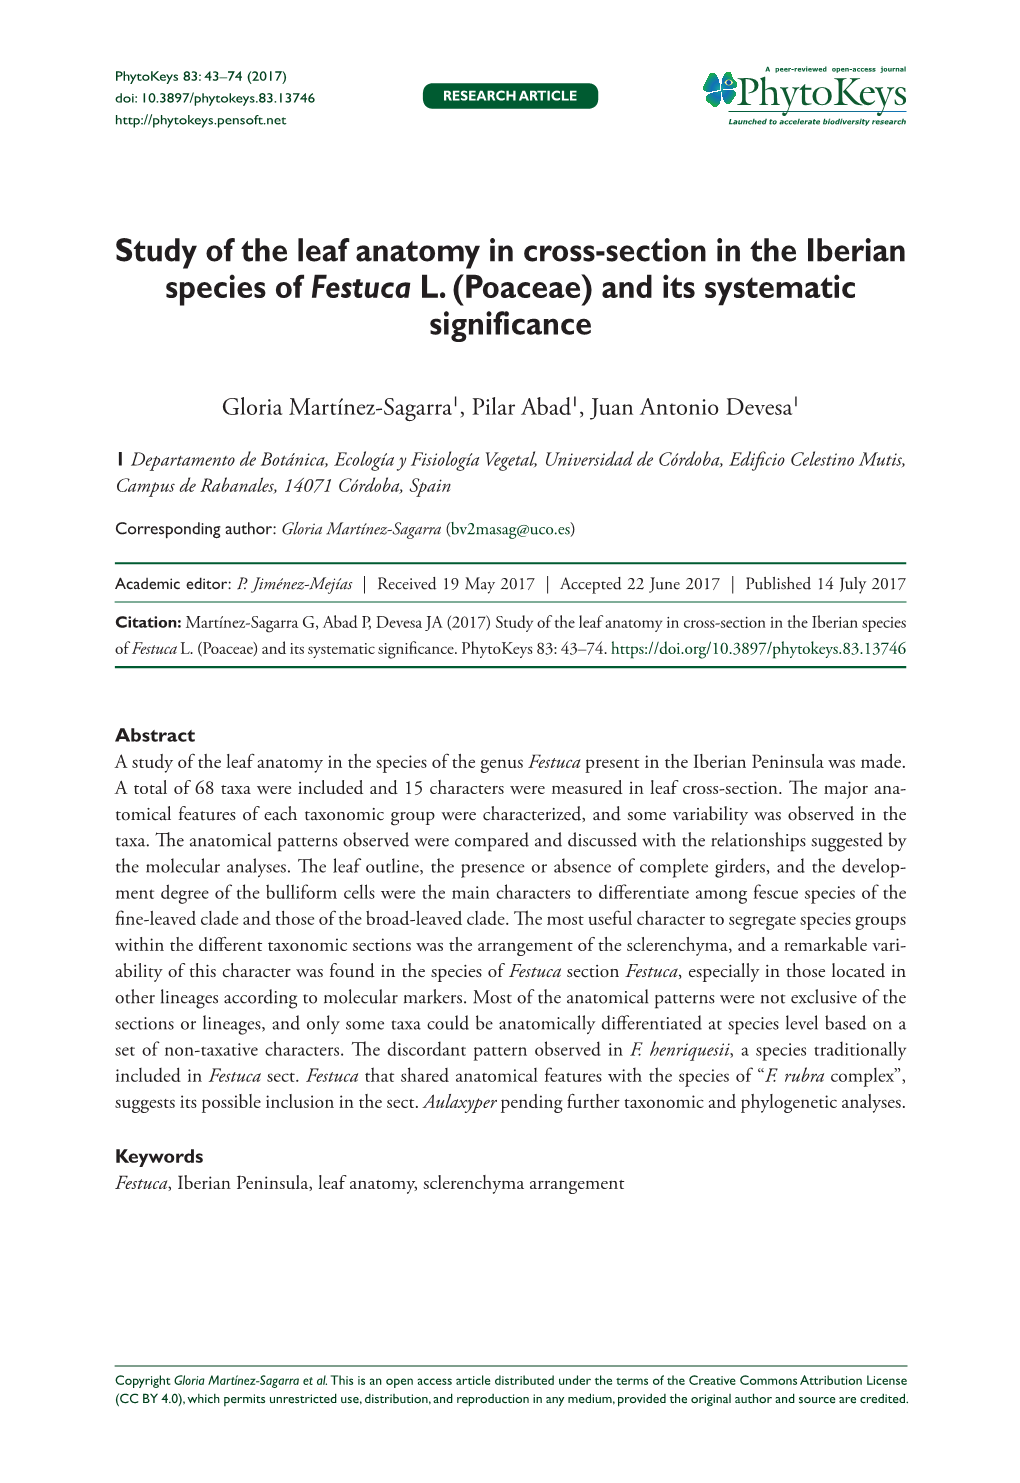 Study of the Leaf Anatomy in Cross-Section in the Iberian Species of Festuca L